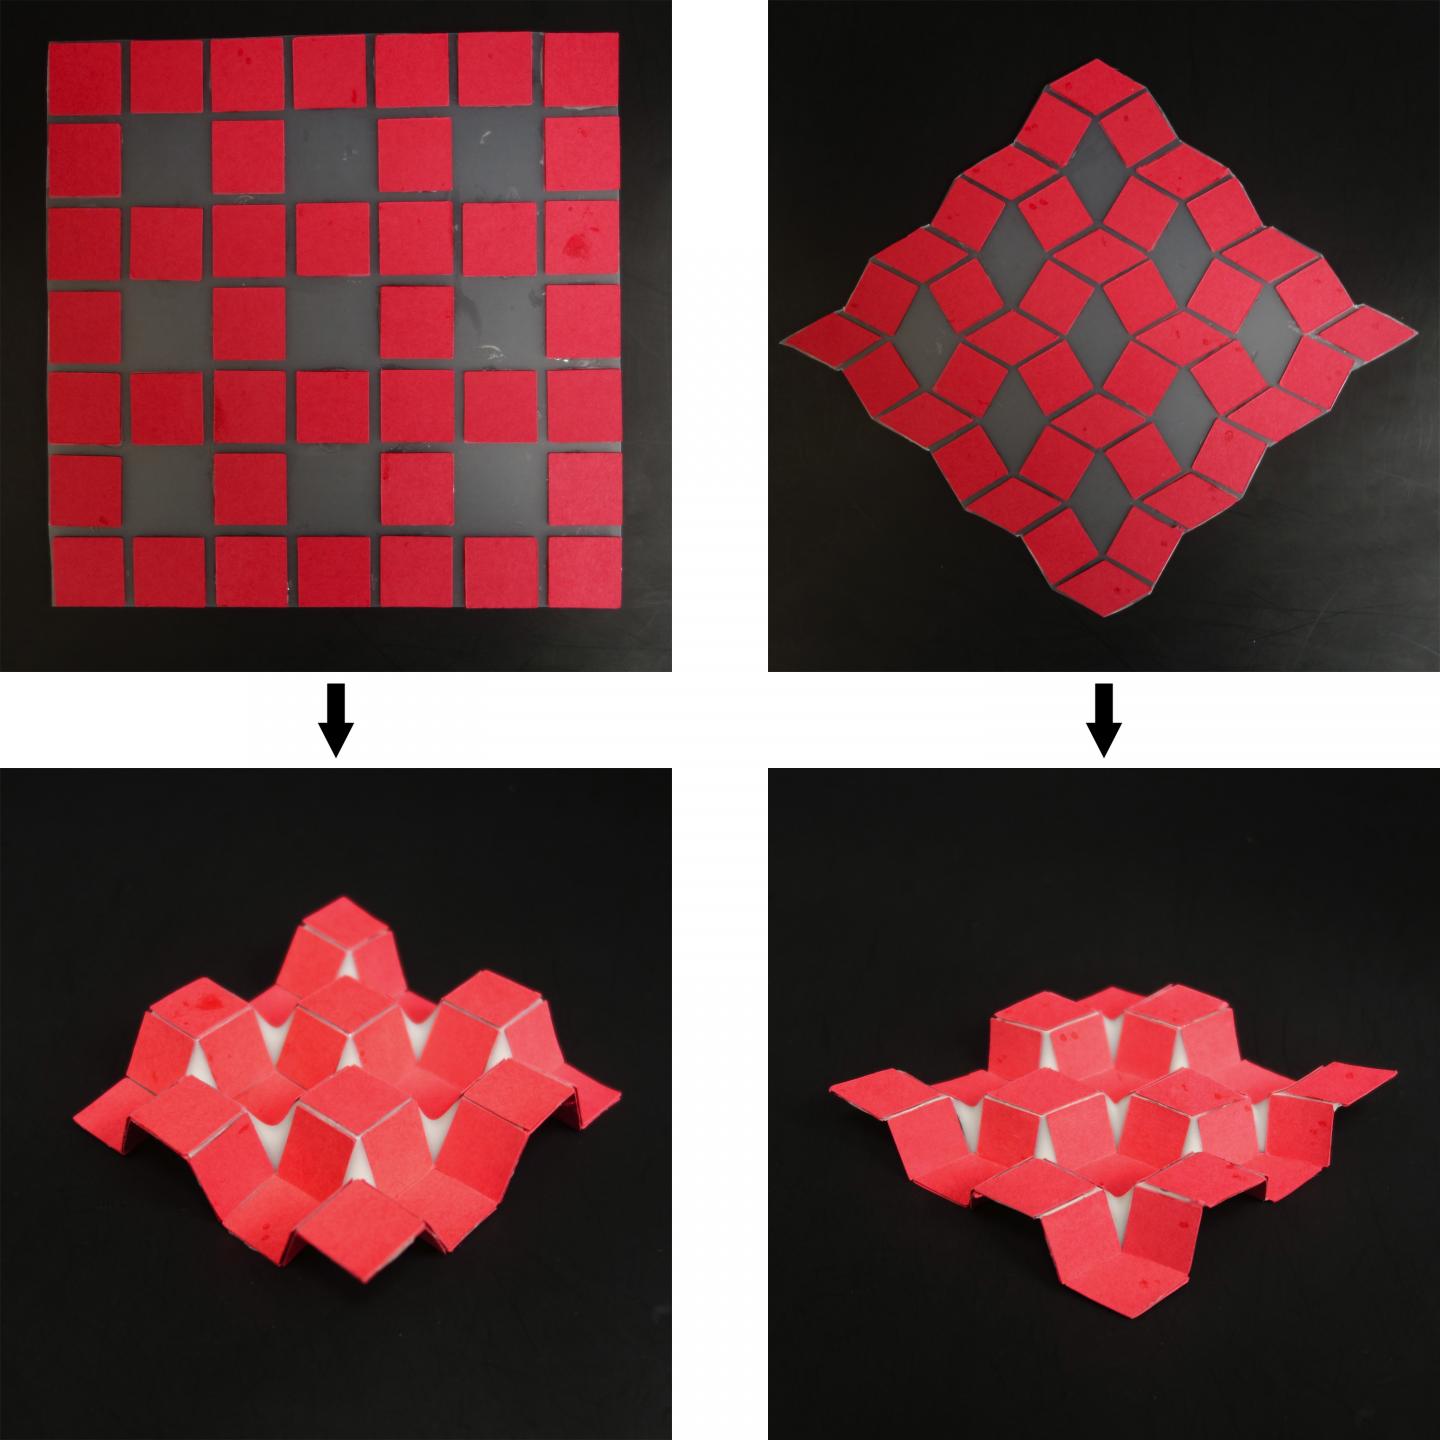 A New Tool For Guiding Self-Folding, 3D Structures